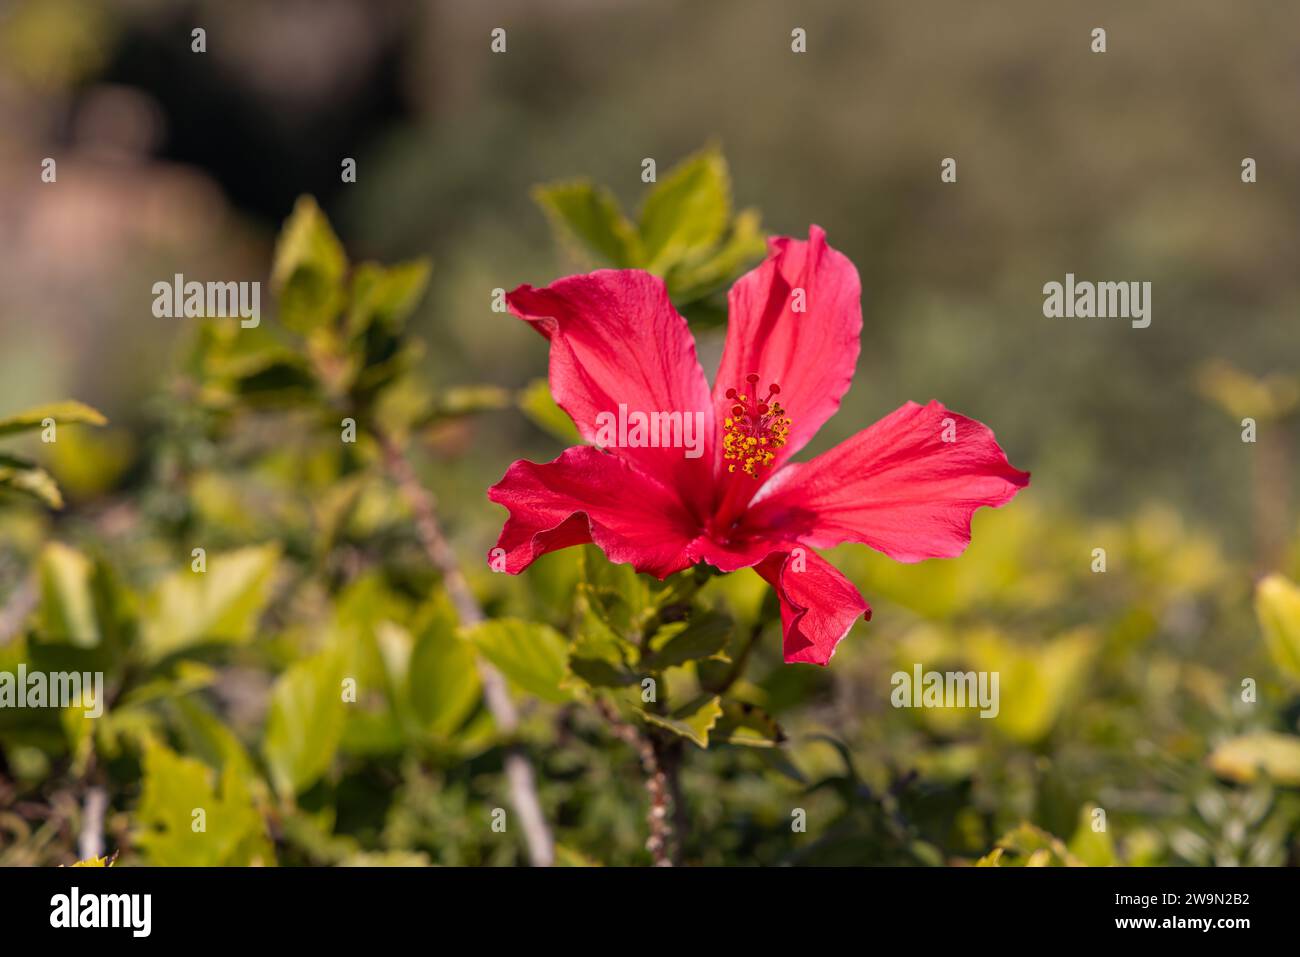 Close up image of red hawaiian flower highlighted by the sun Stock Photo